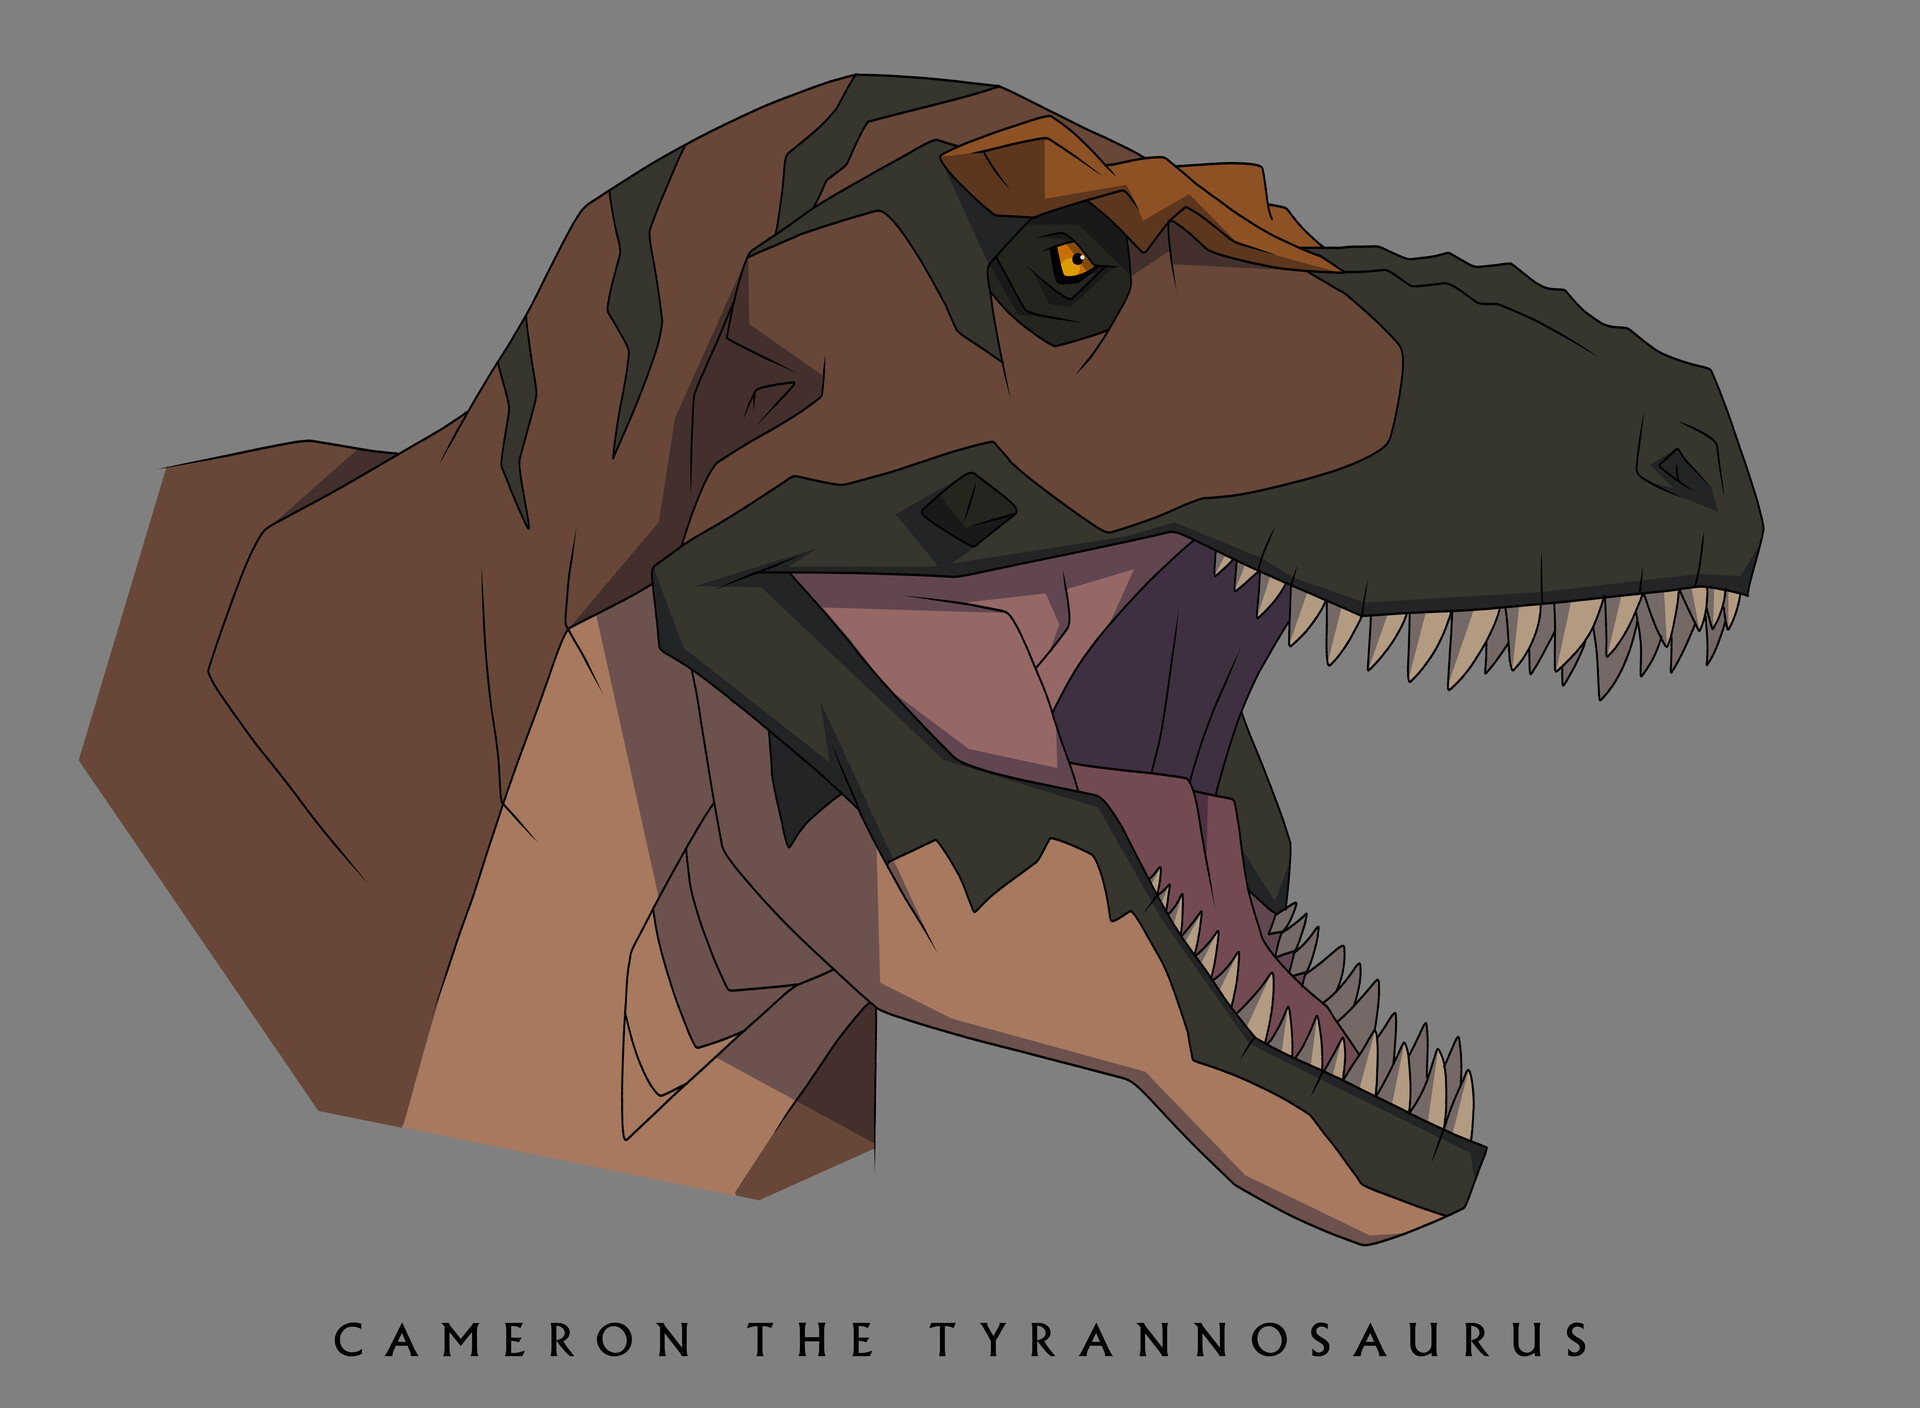 Cameron the T. rex Dinosaur Model is Reviewed